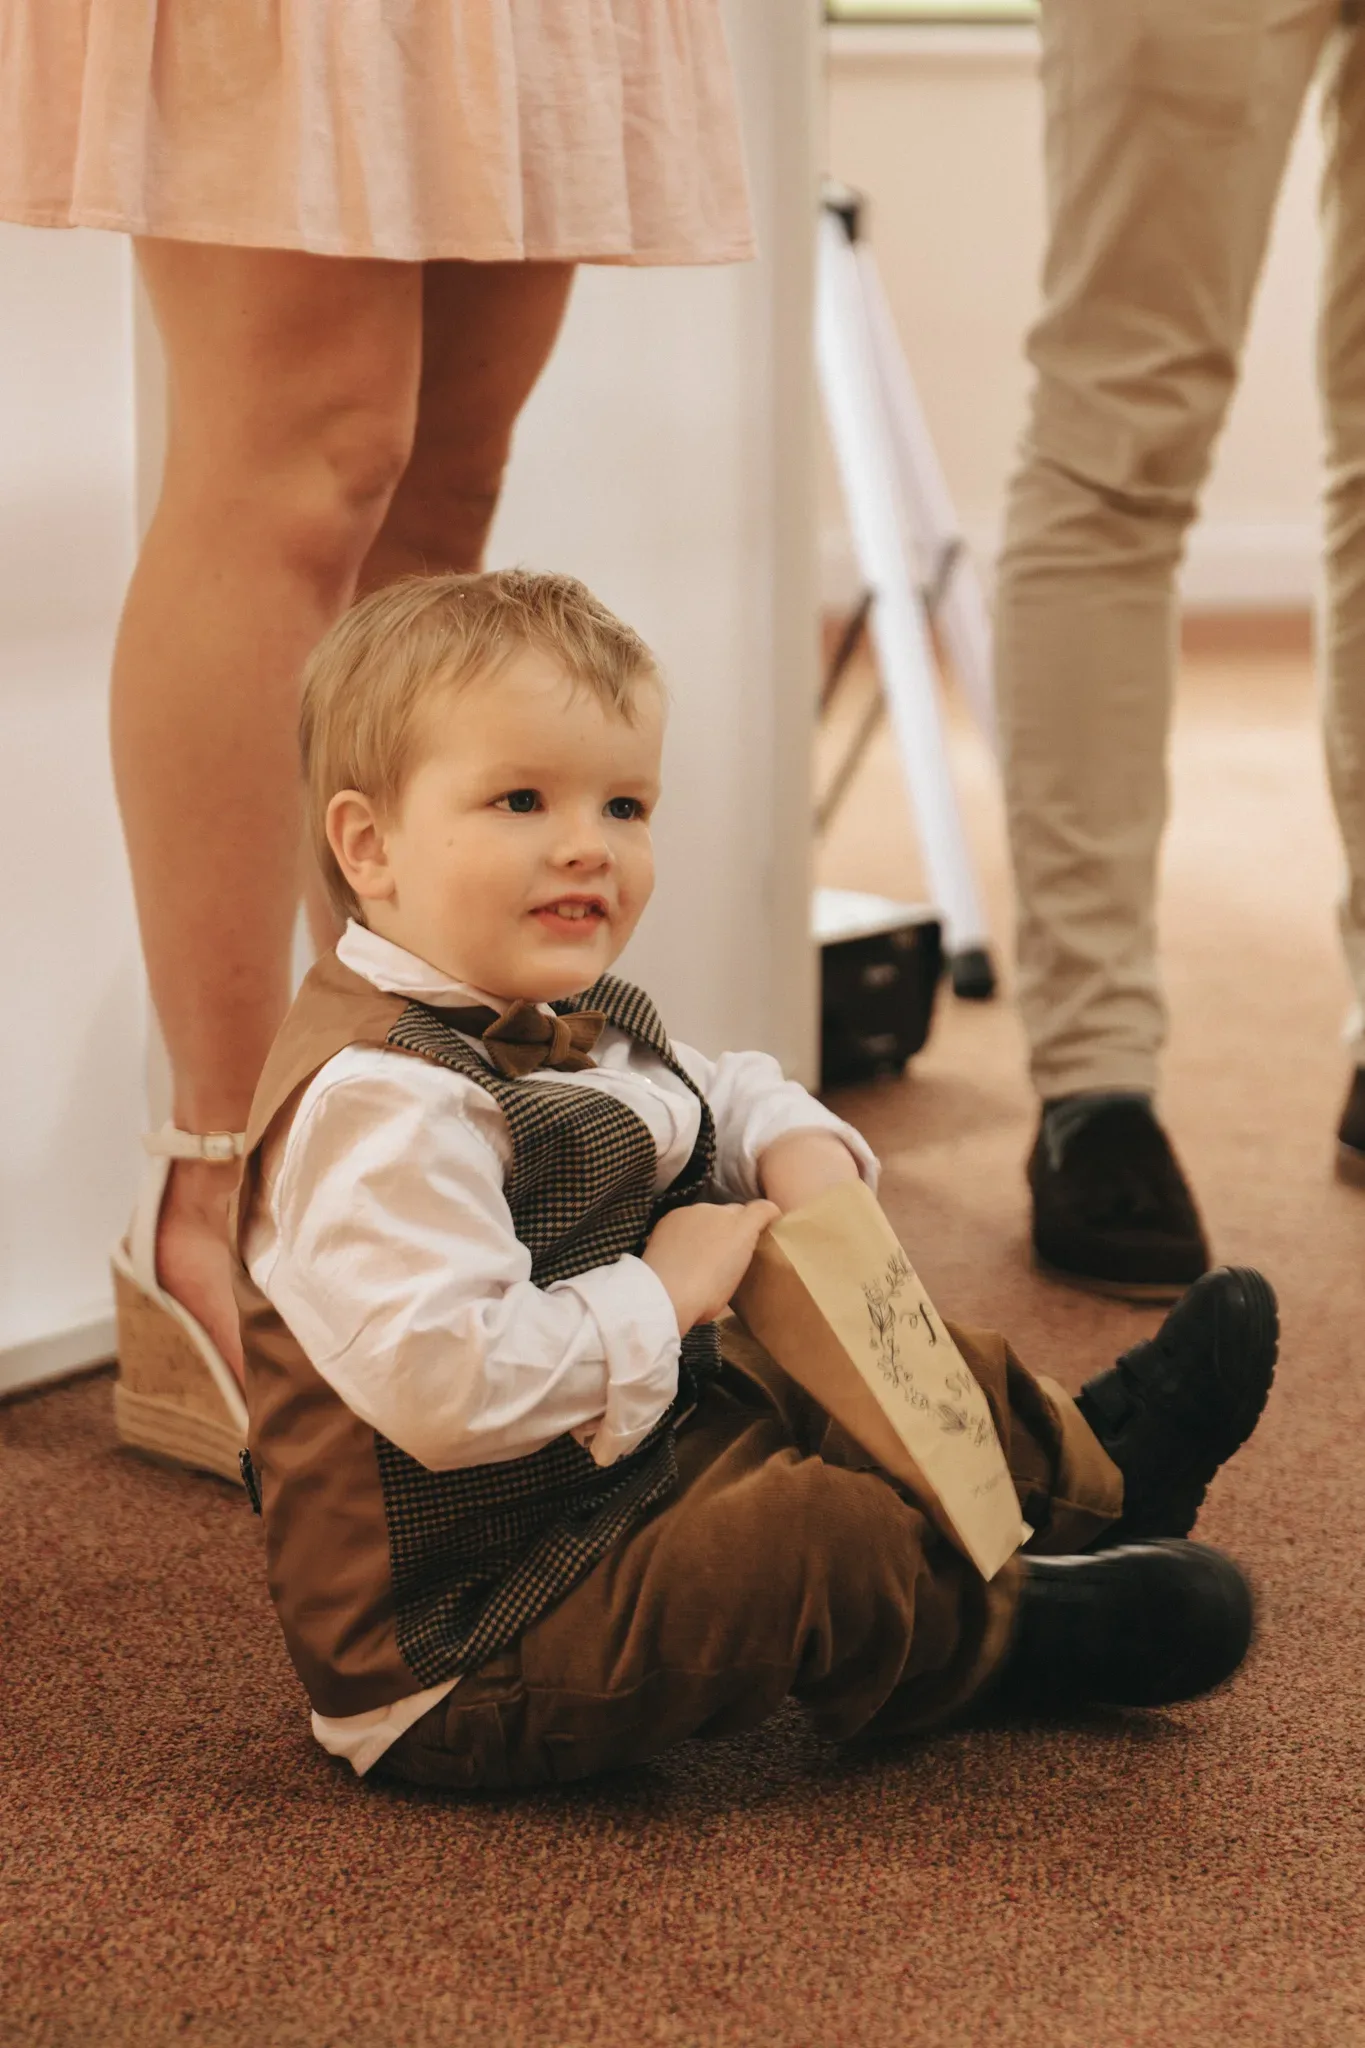 A toddler boy sits on the floor smiling, dressed in formal attire with a bow tie and suspenders. he is surrounded by standing adults, partially visible, focusing attention on him.